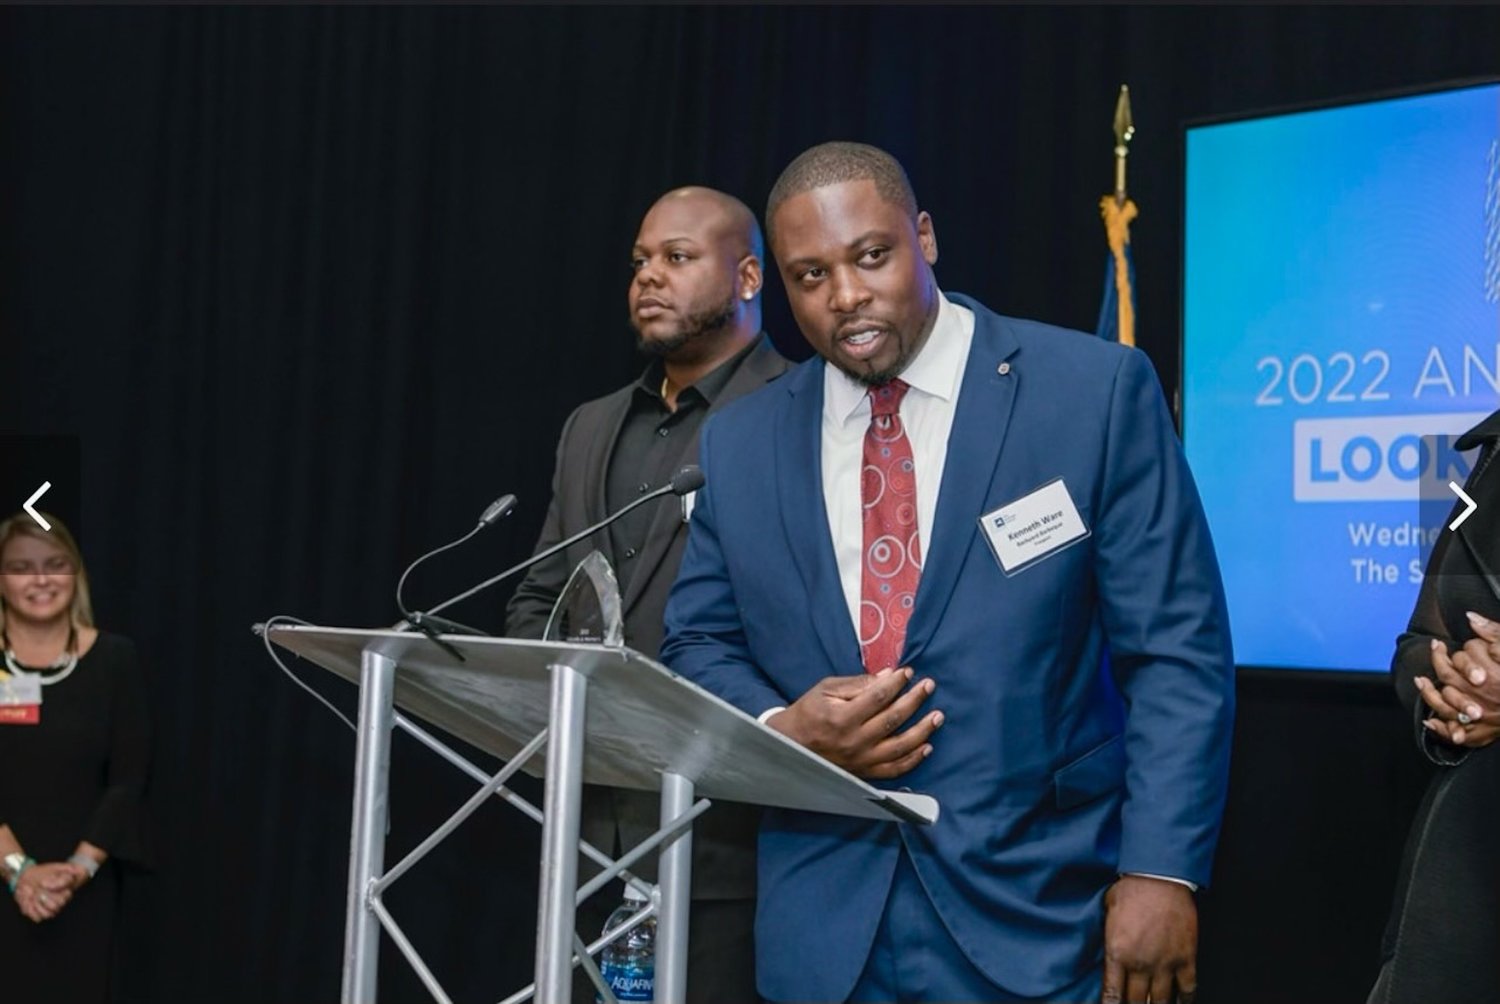 Kenneth Ware and Michael Toney, co-owners of Backyard Barbeque on Woodcleft Avenue, were winners of the first-ever Minority & Women’s Business Award, presented by the Business Council of New York State, for their dedication to diversity and a desire to give back to the community.